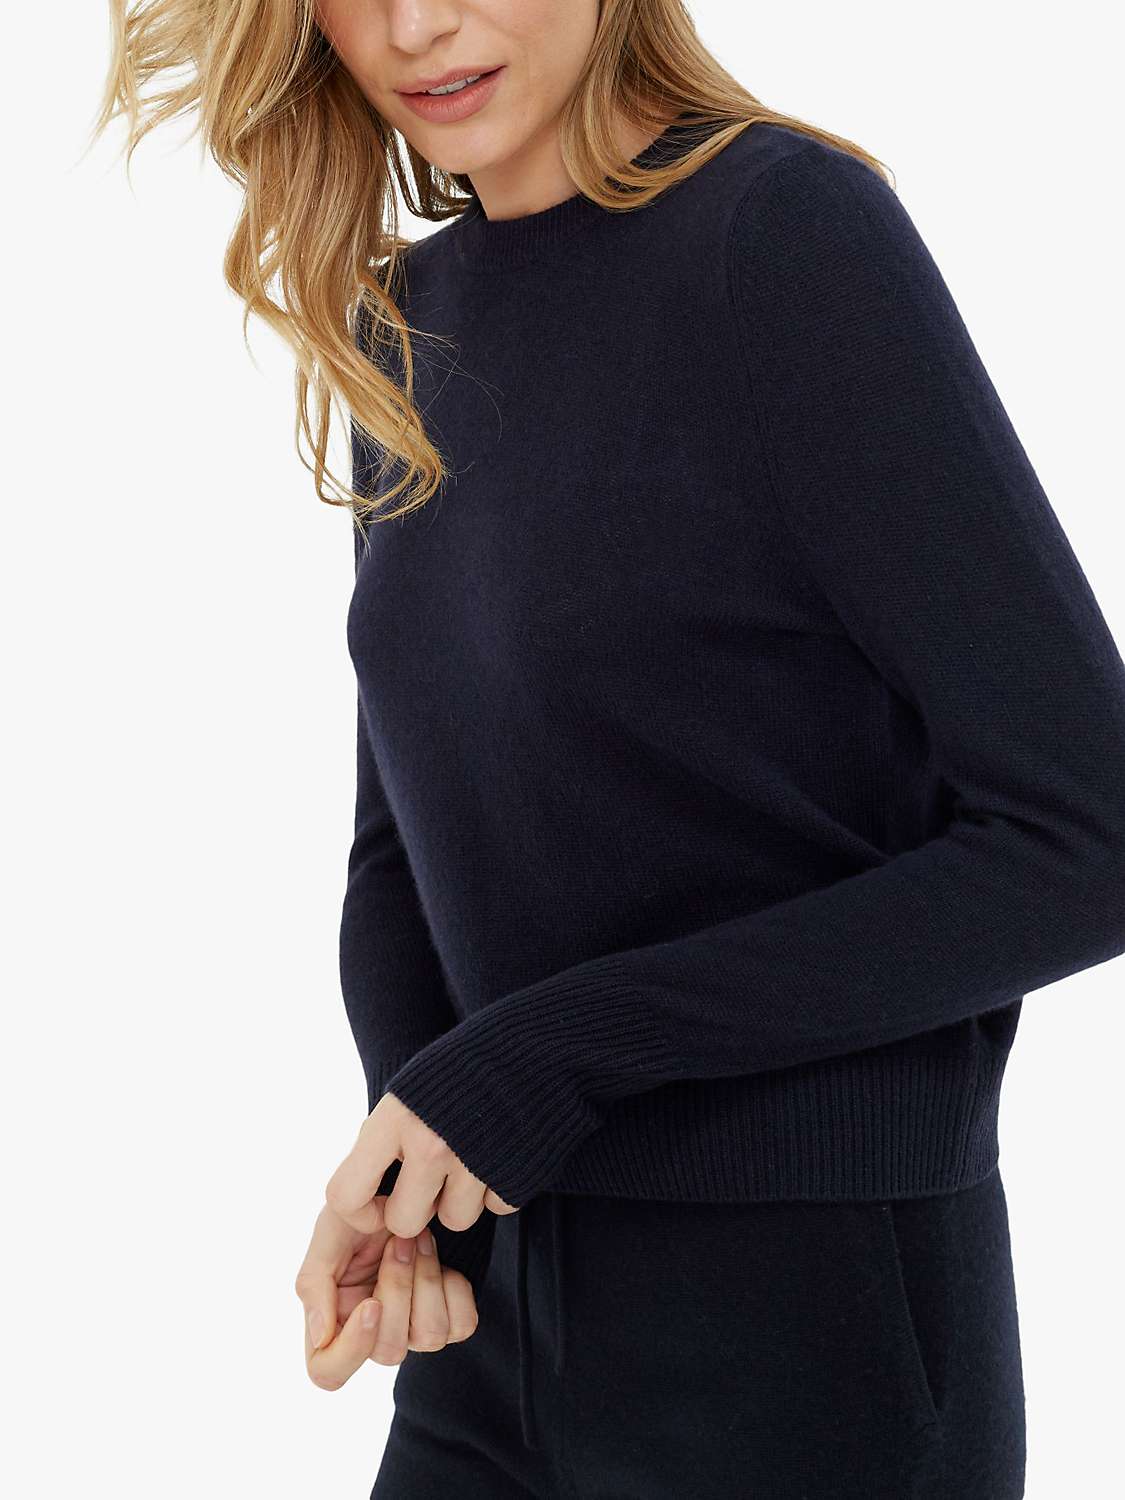 Buy Chinti & Parker Cashmere Cropped Jumper, Navy Online at johnlewis.com